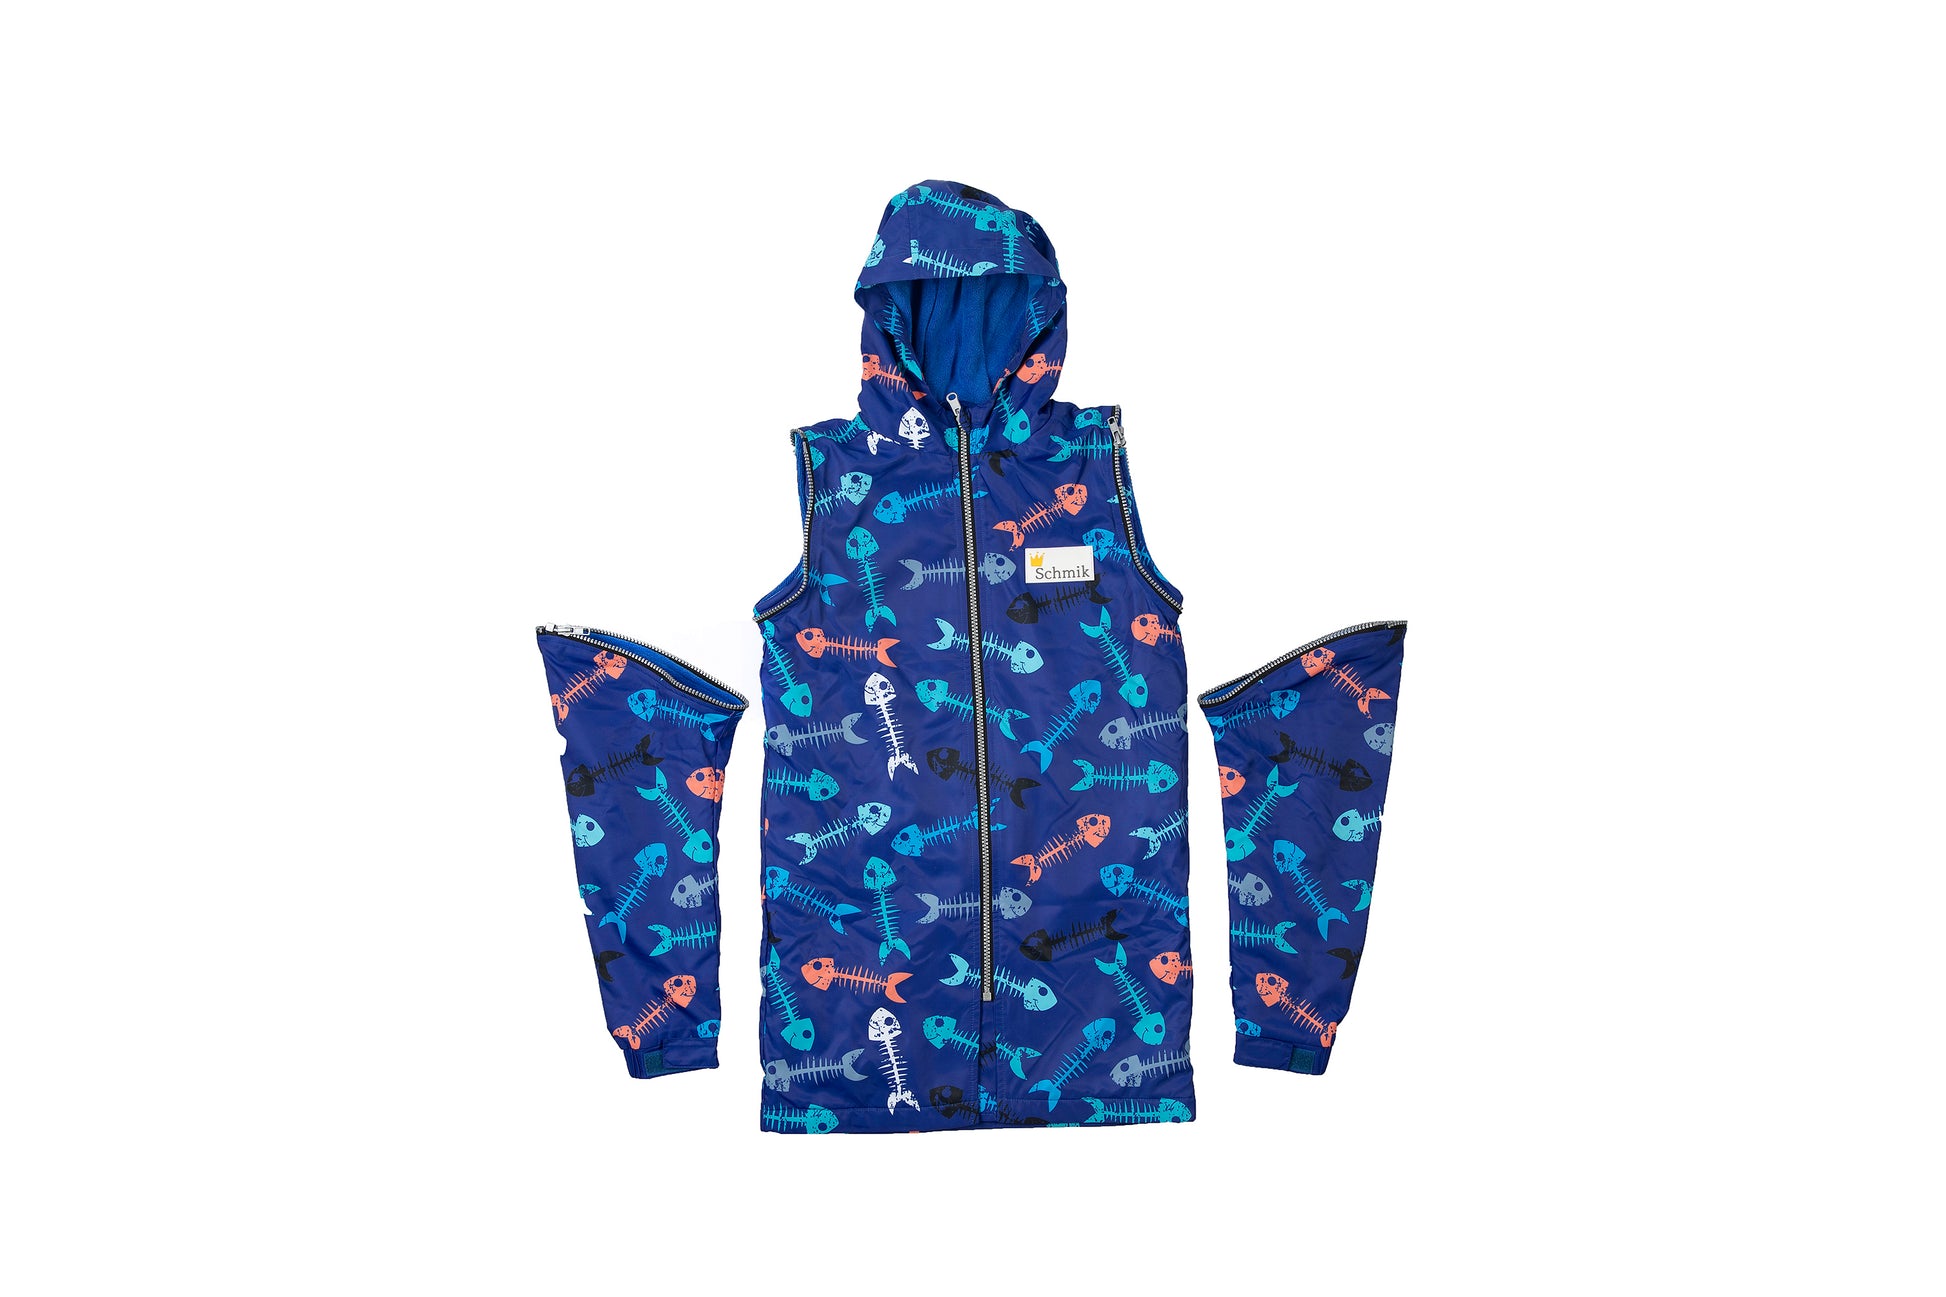 Picture of Schmik fishbone print swim parka with the arms unzipped. Every Schmik swim parka comes with removable arms. Swim parka can be worm in both summer and winter.